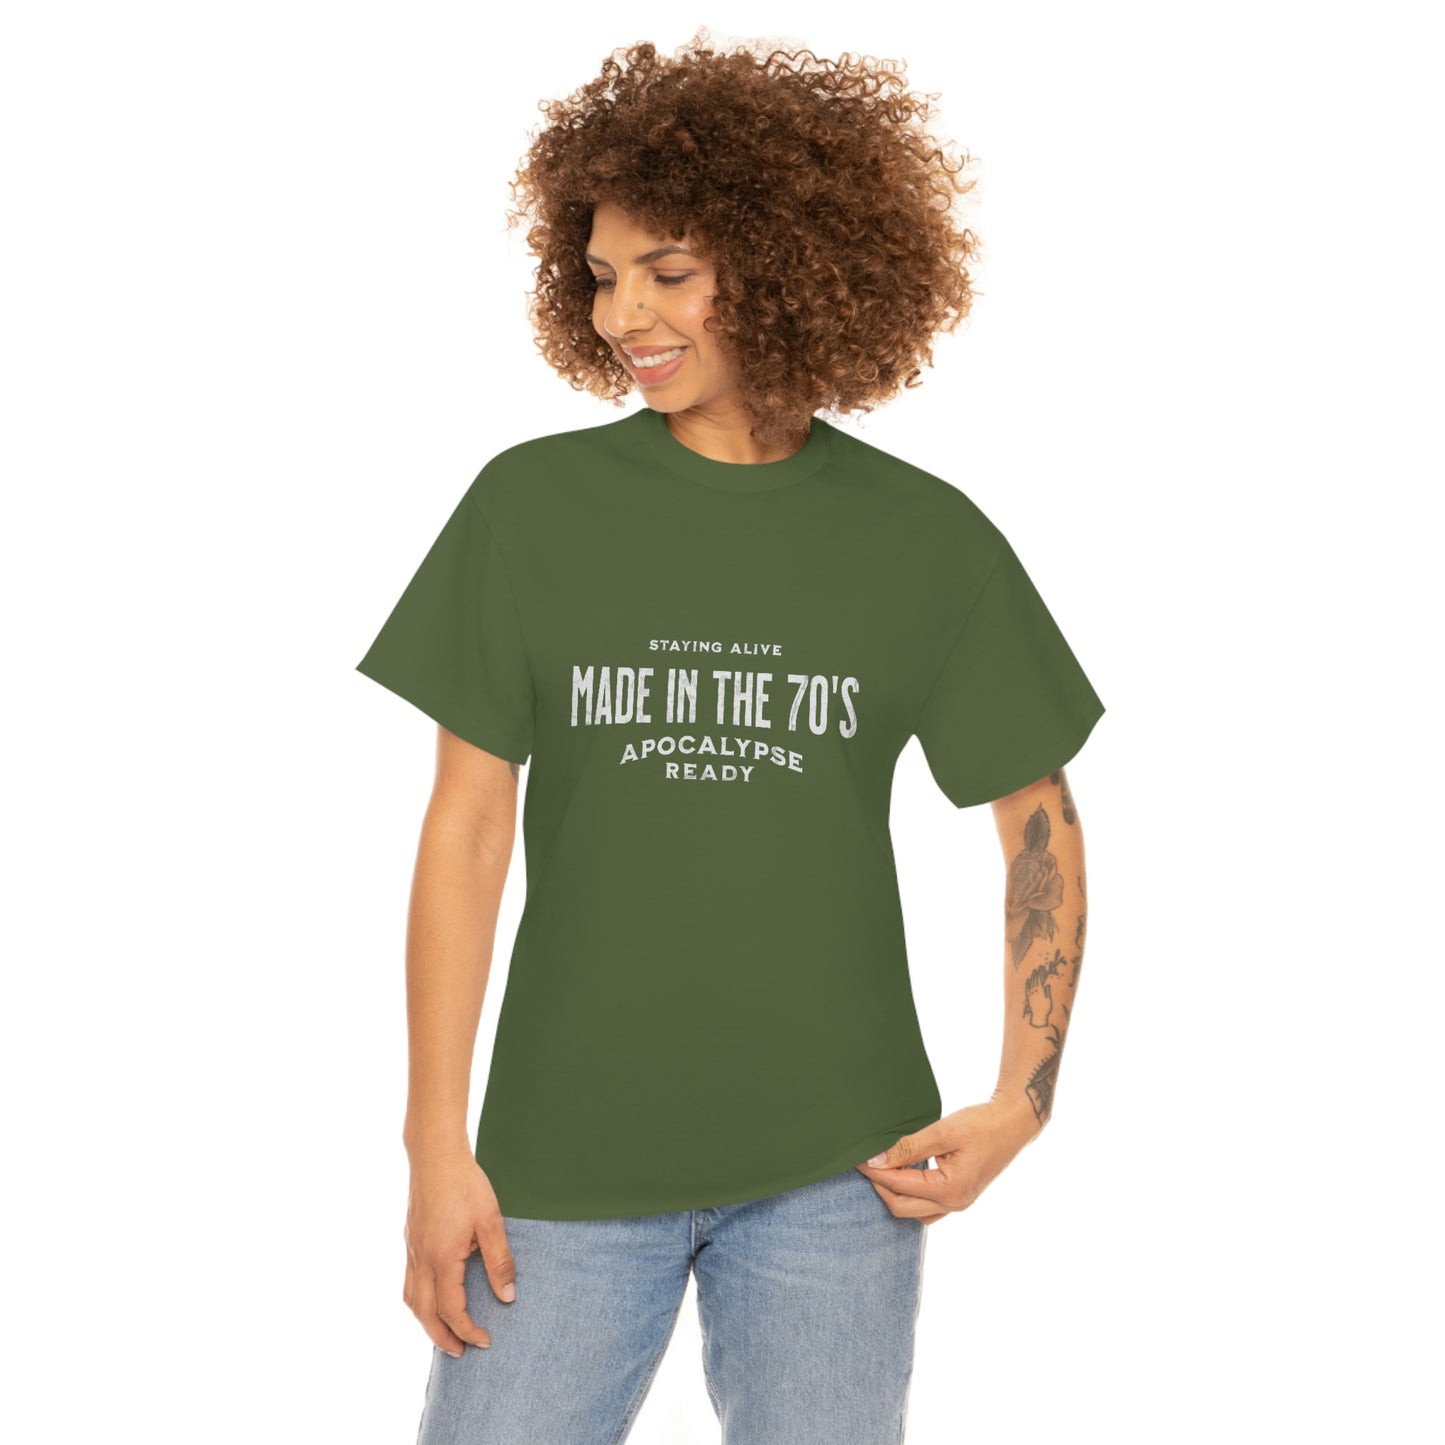 Staying Alive Unisex Cotton T-shirt